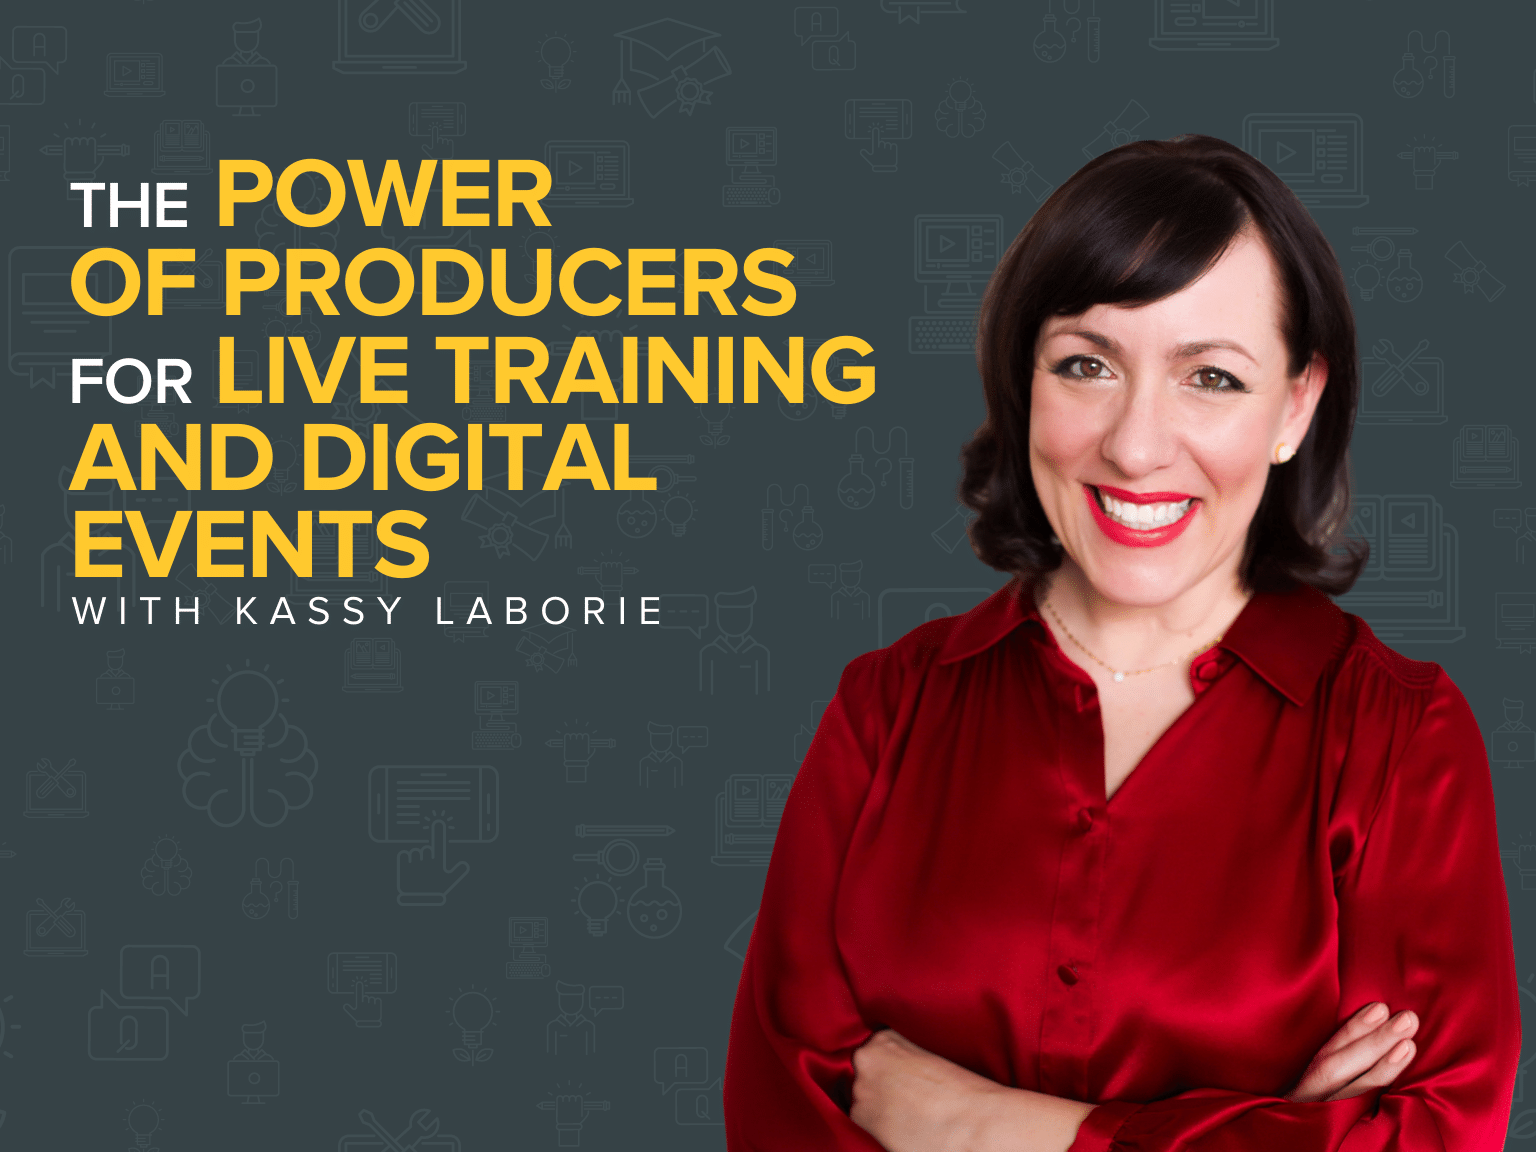 The Power of Producers for Live Training and Digital Events